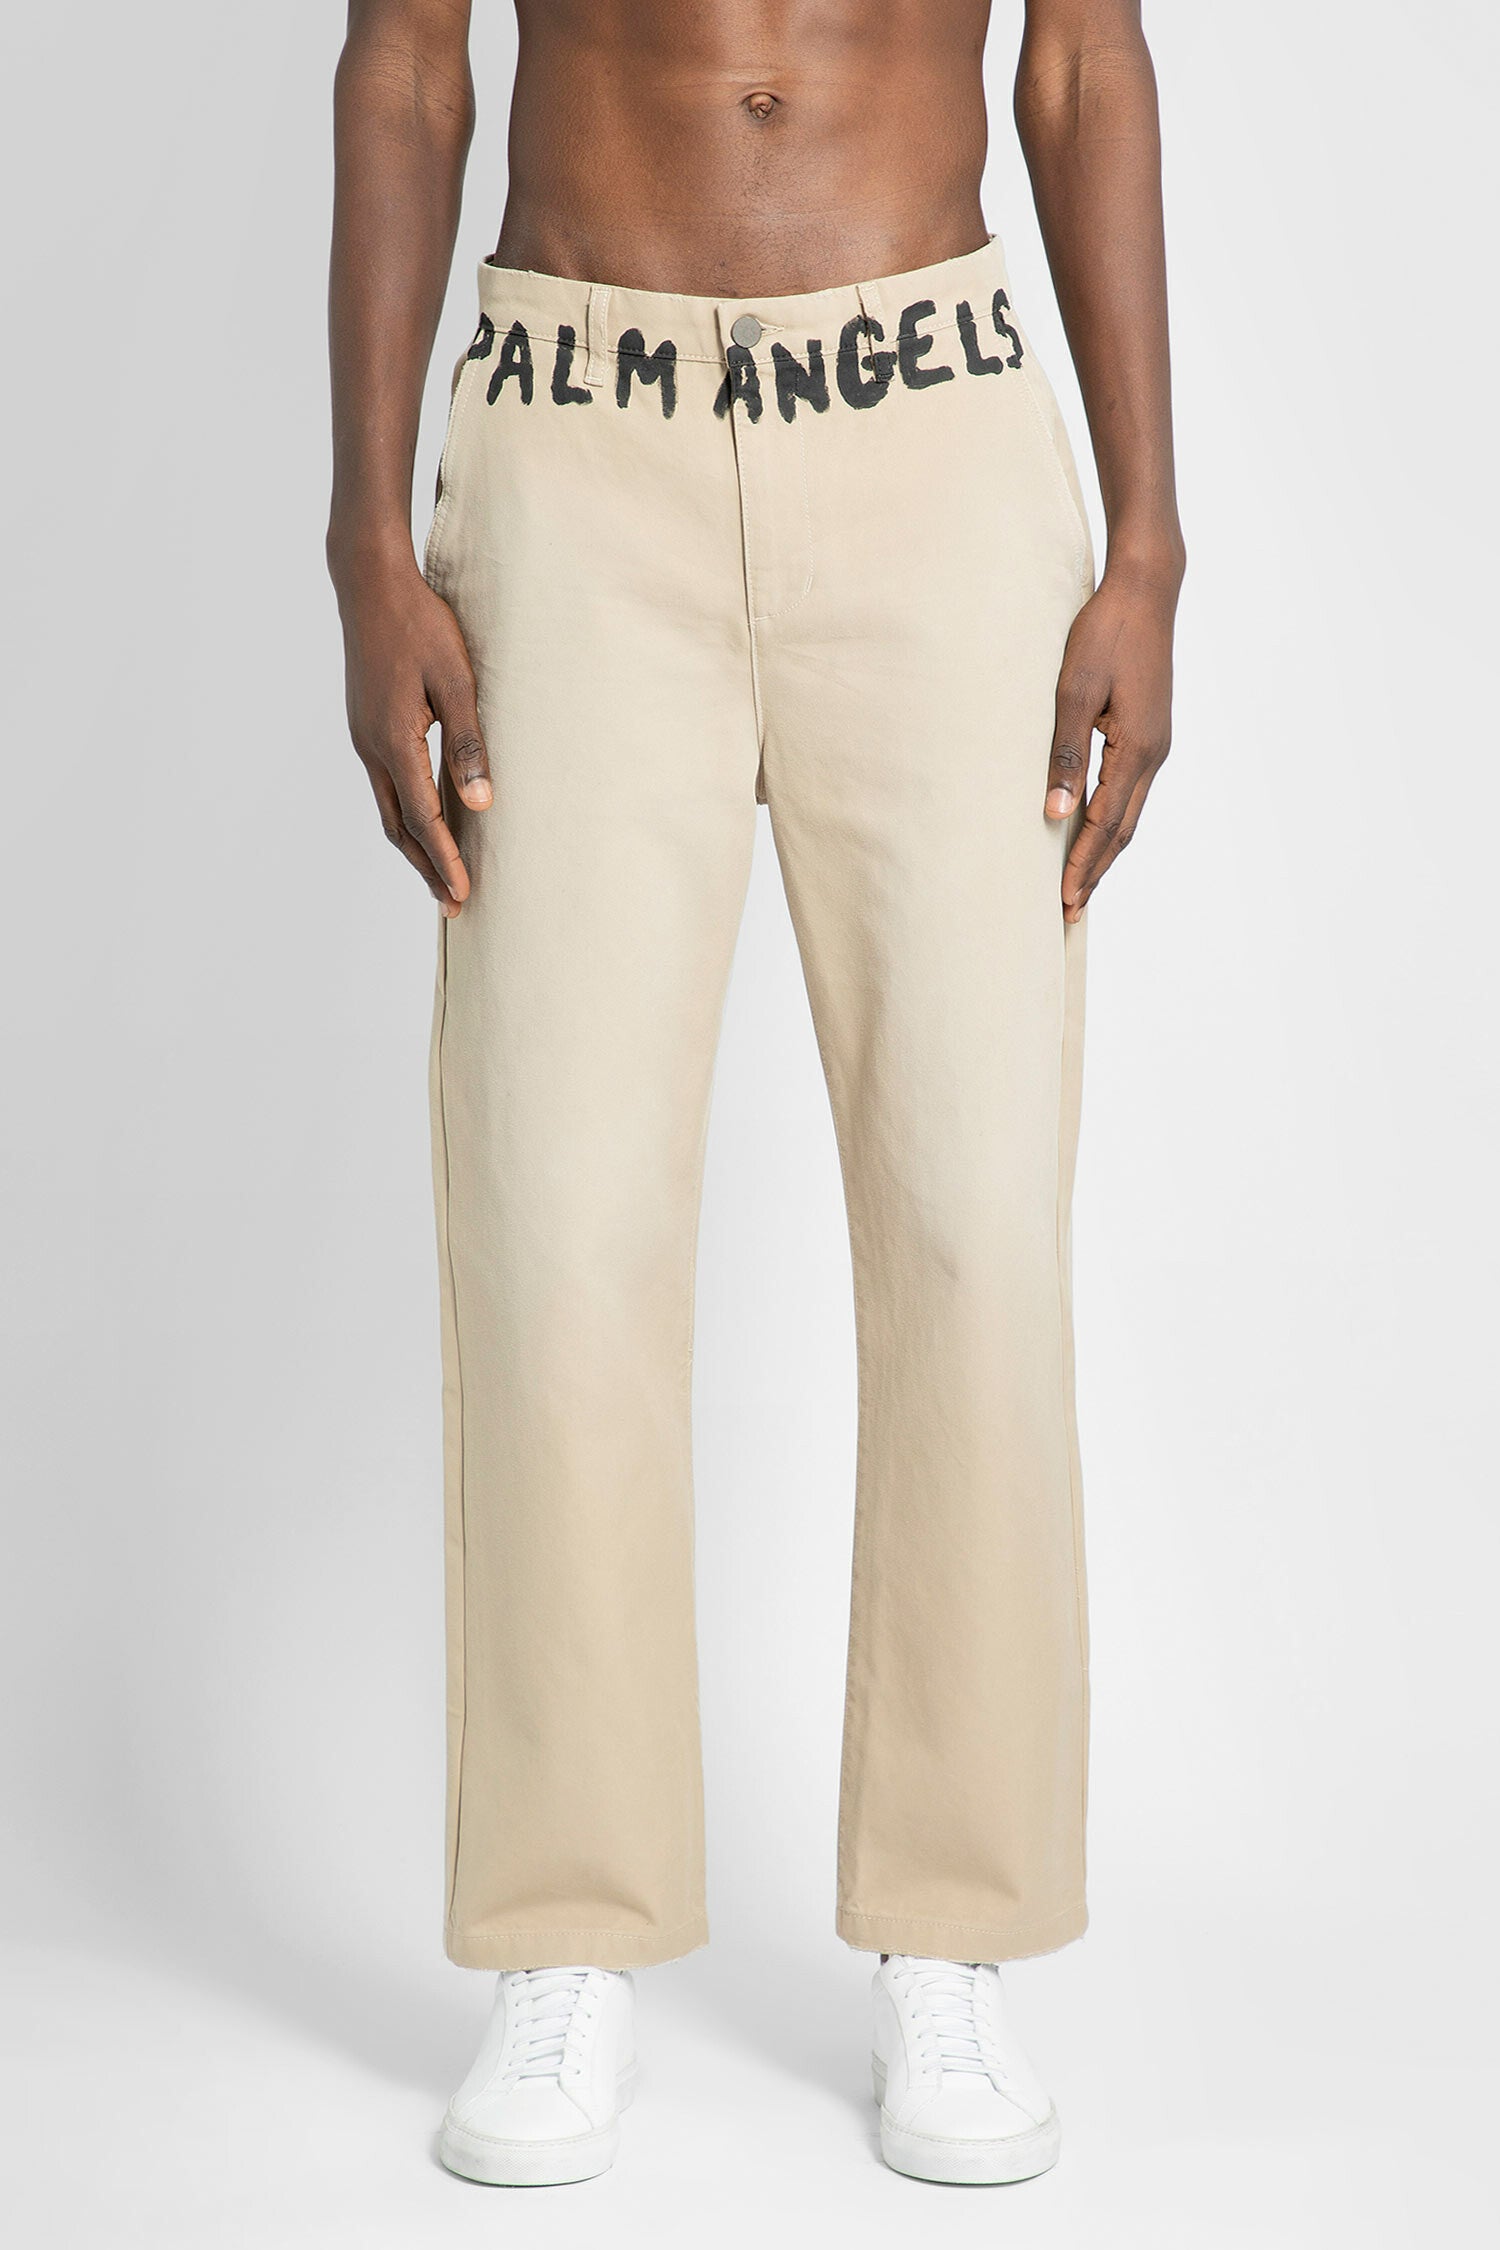 PALM ANGELS BEIGE TROUSERS